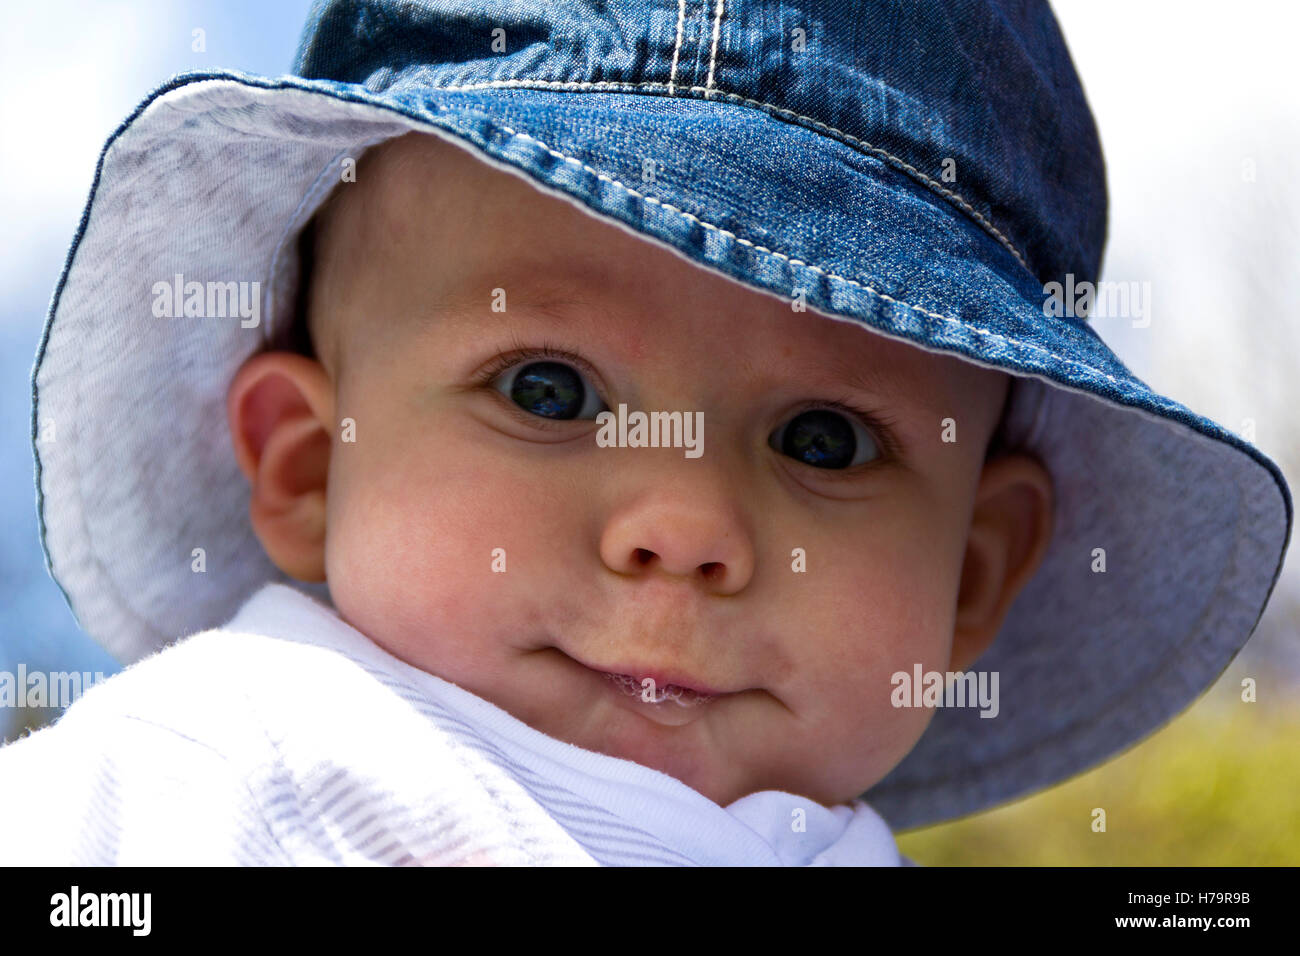 Baby boy dribbling and wearing a sun hat Stock Photo